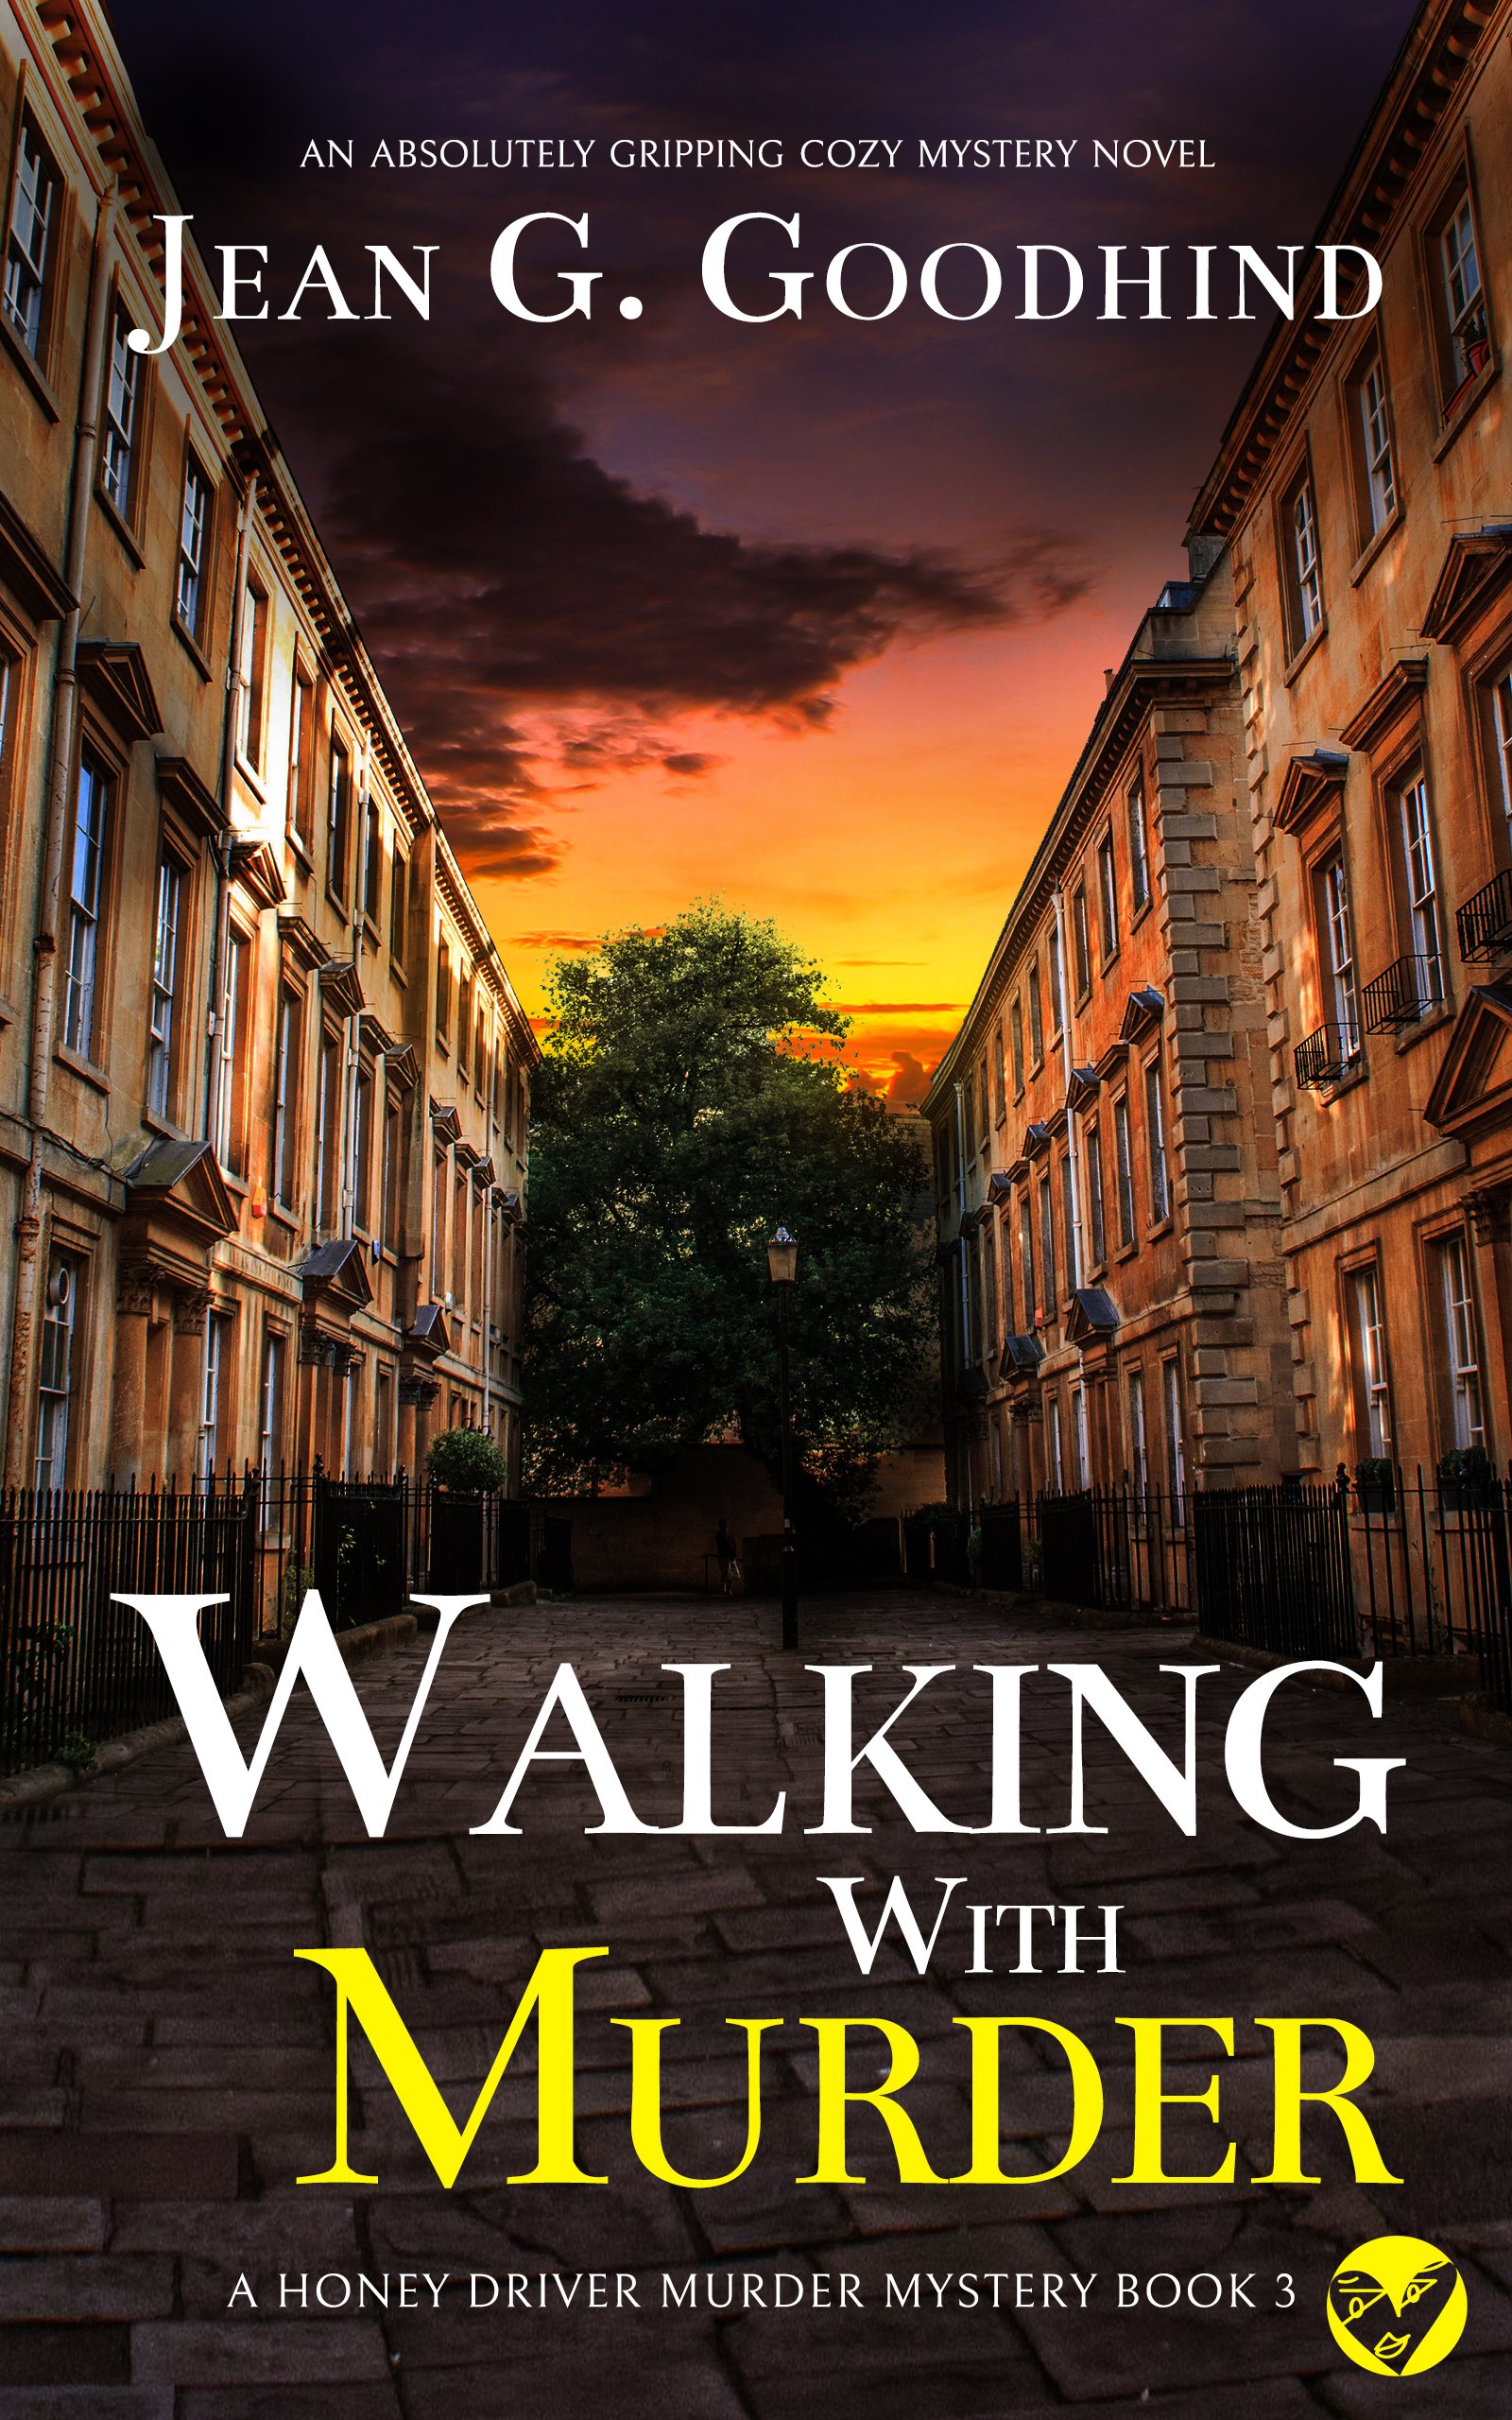 WALKING WITH MURDER Cover publish.jpg